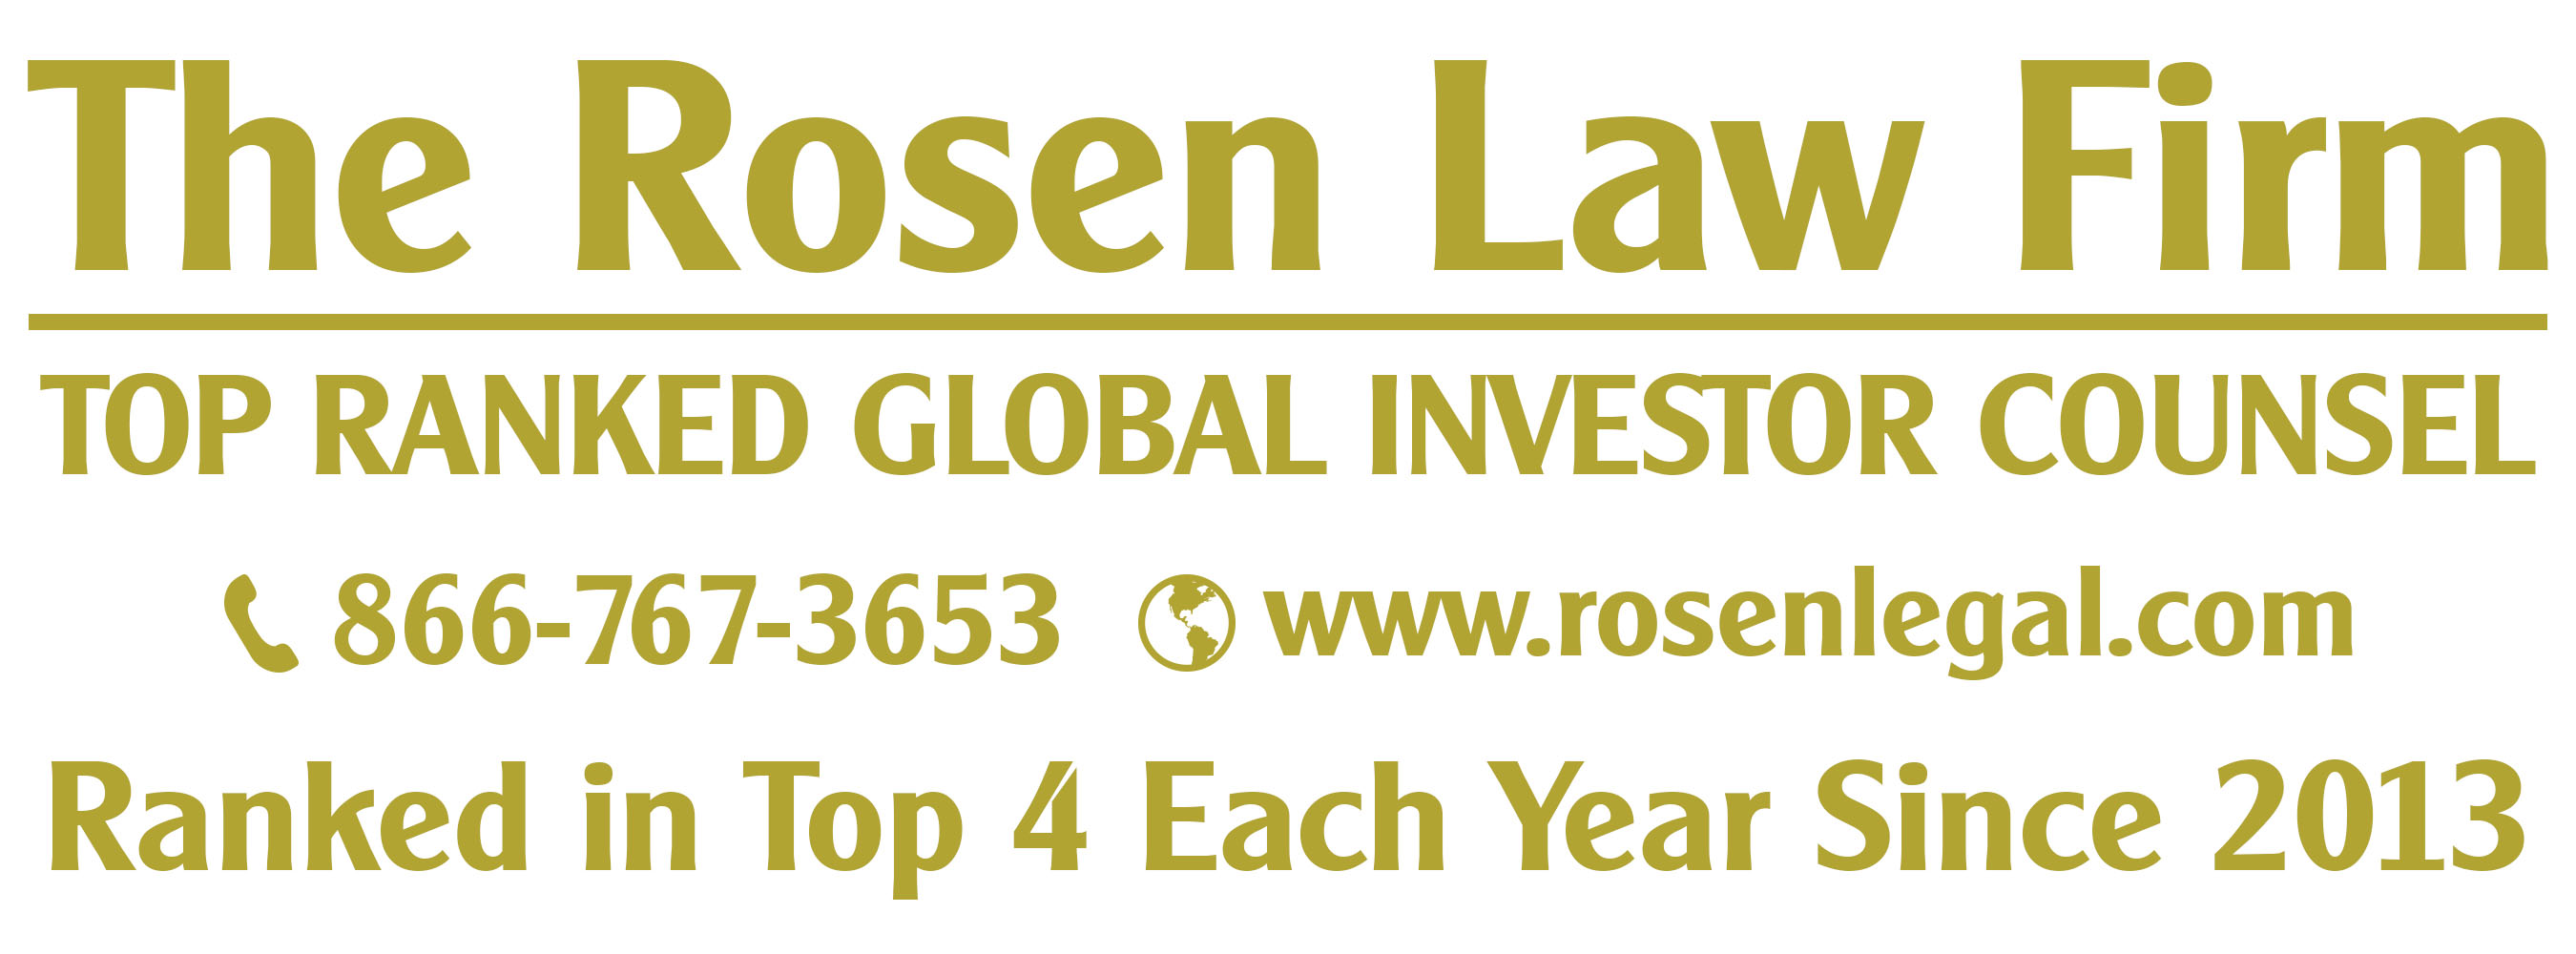 ROSEN, A TRUSTED AND LEADING LAW FIRM, Encourages Roblox - GlobeNewswire